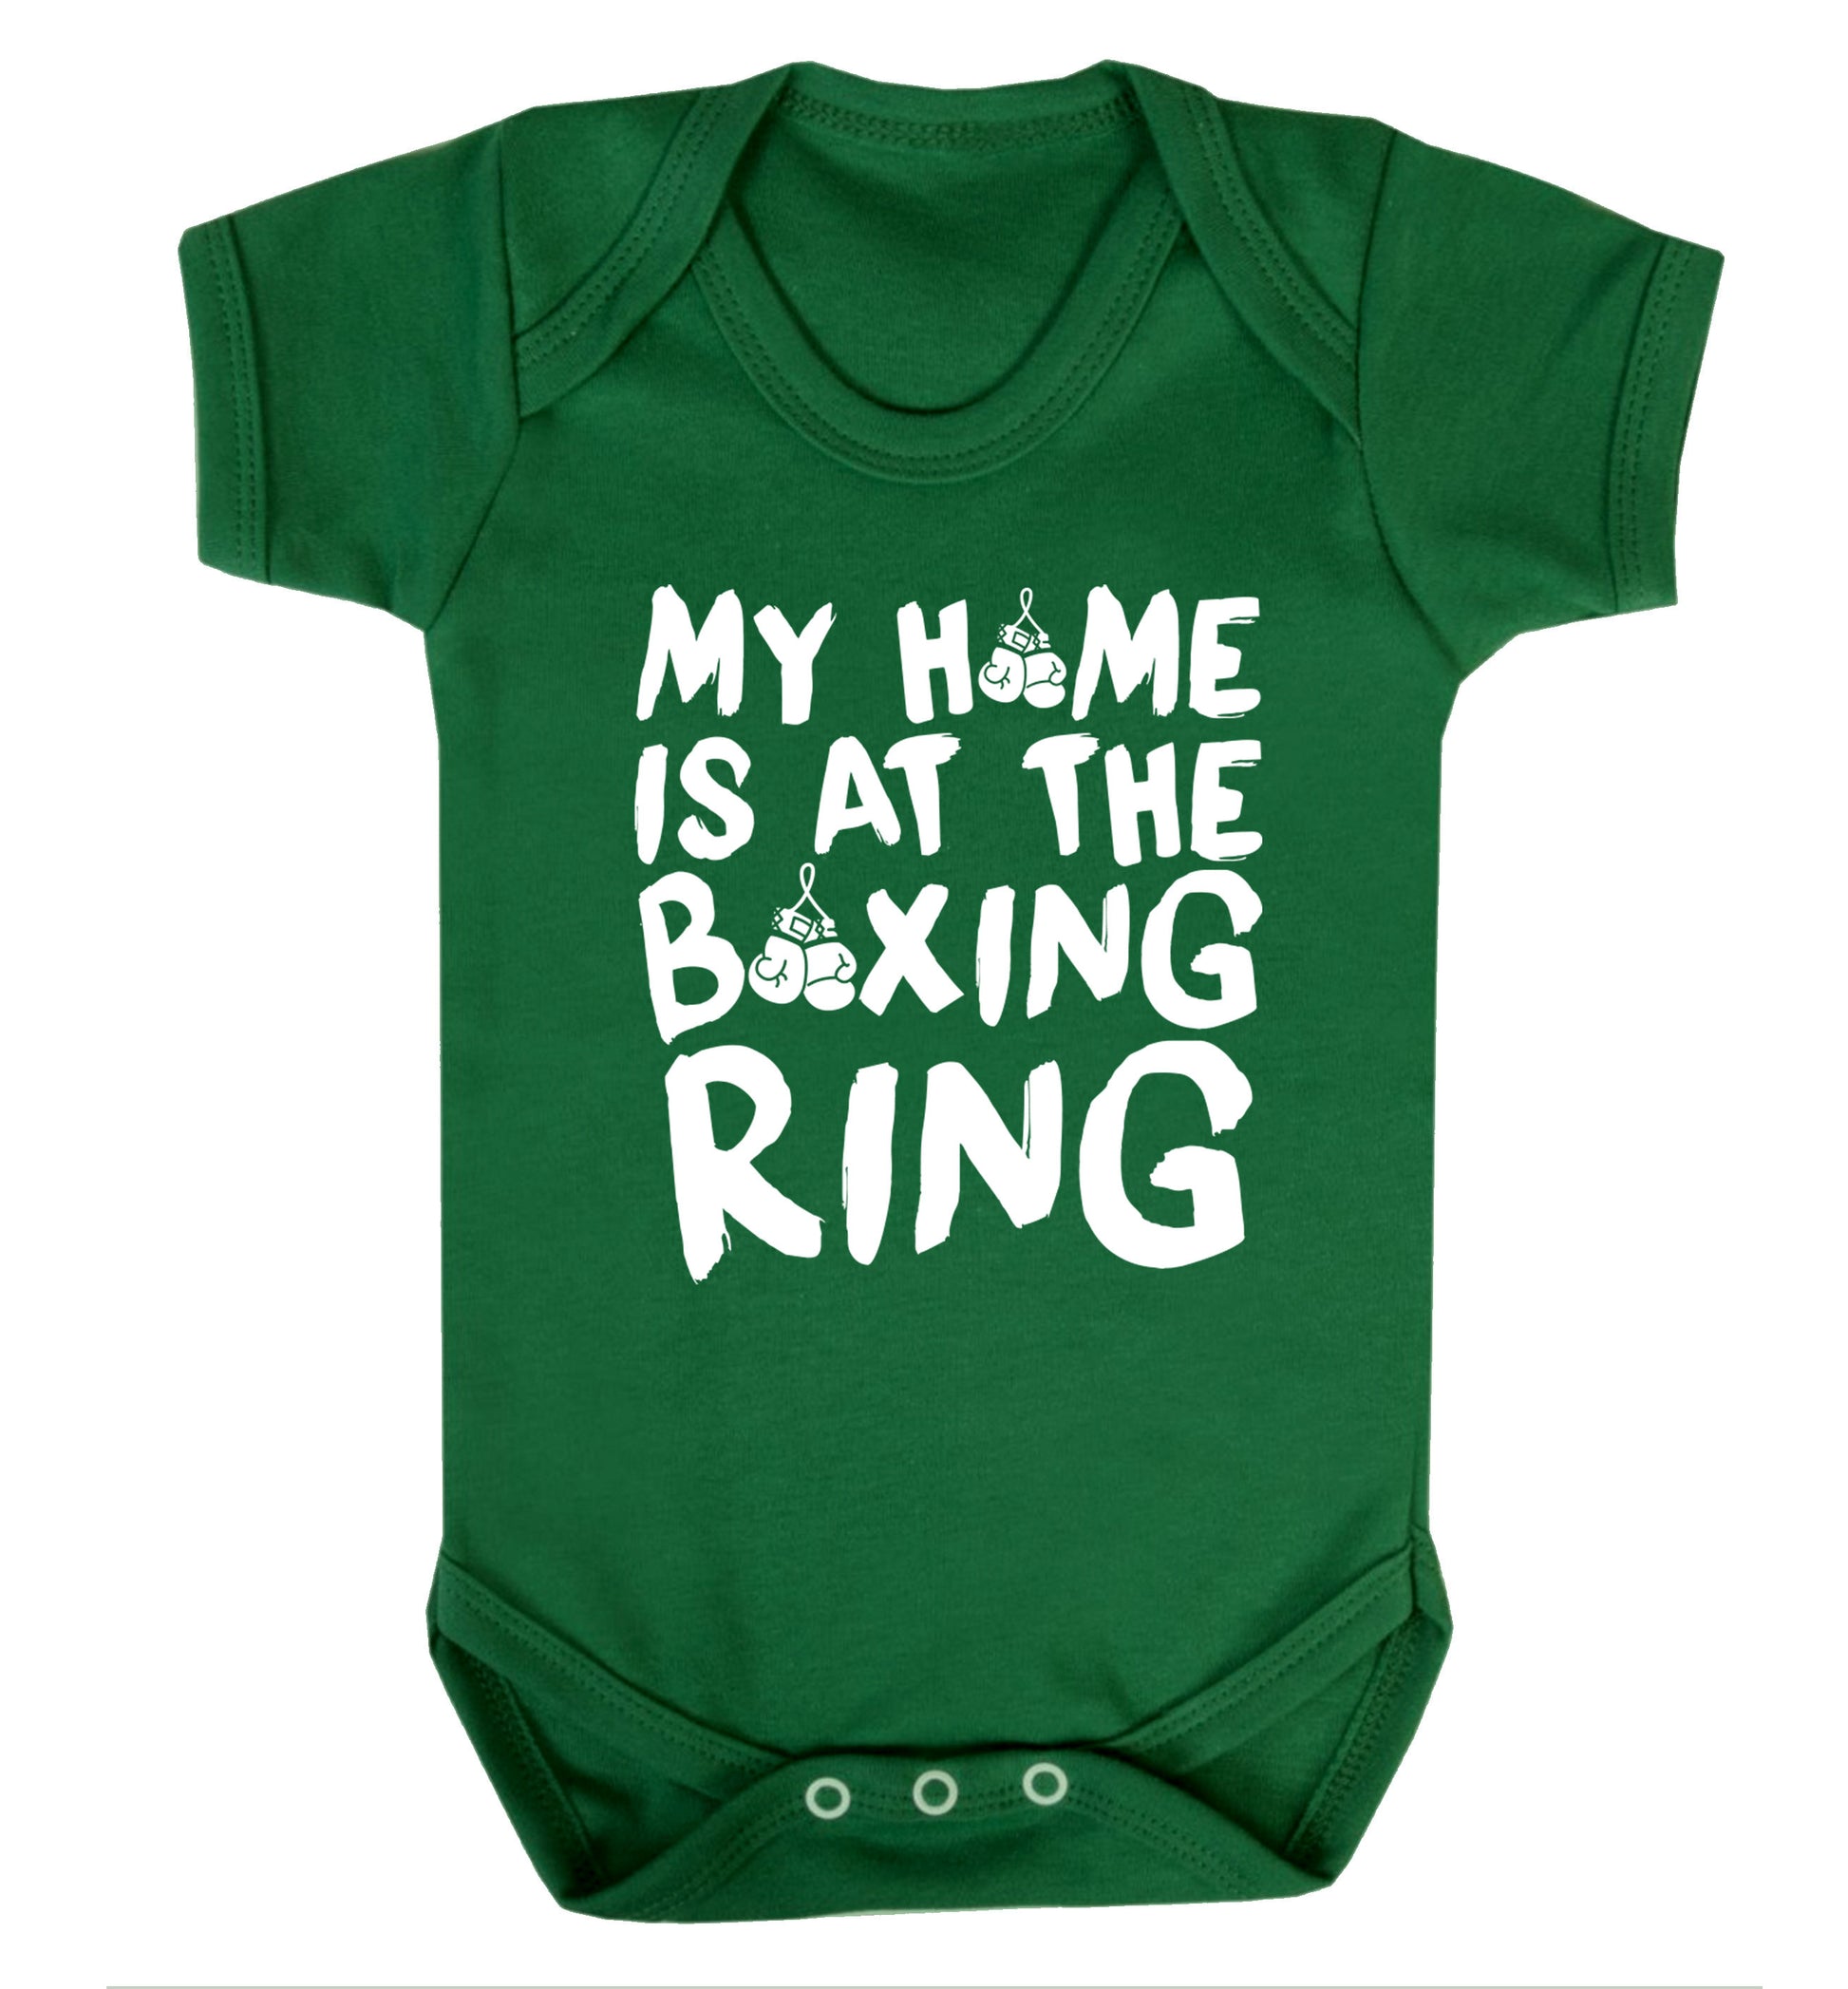 My home is at the boxing ring Baby Vest green 18-24 months